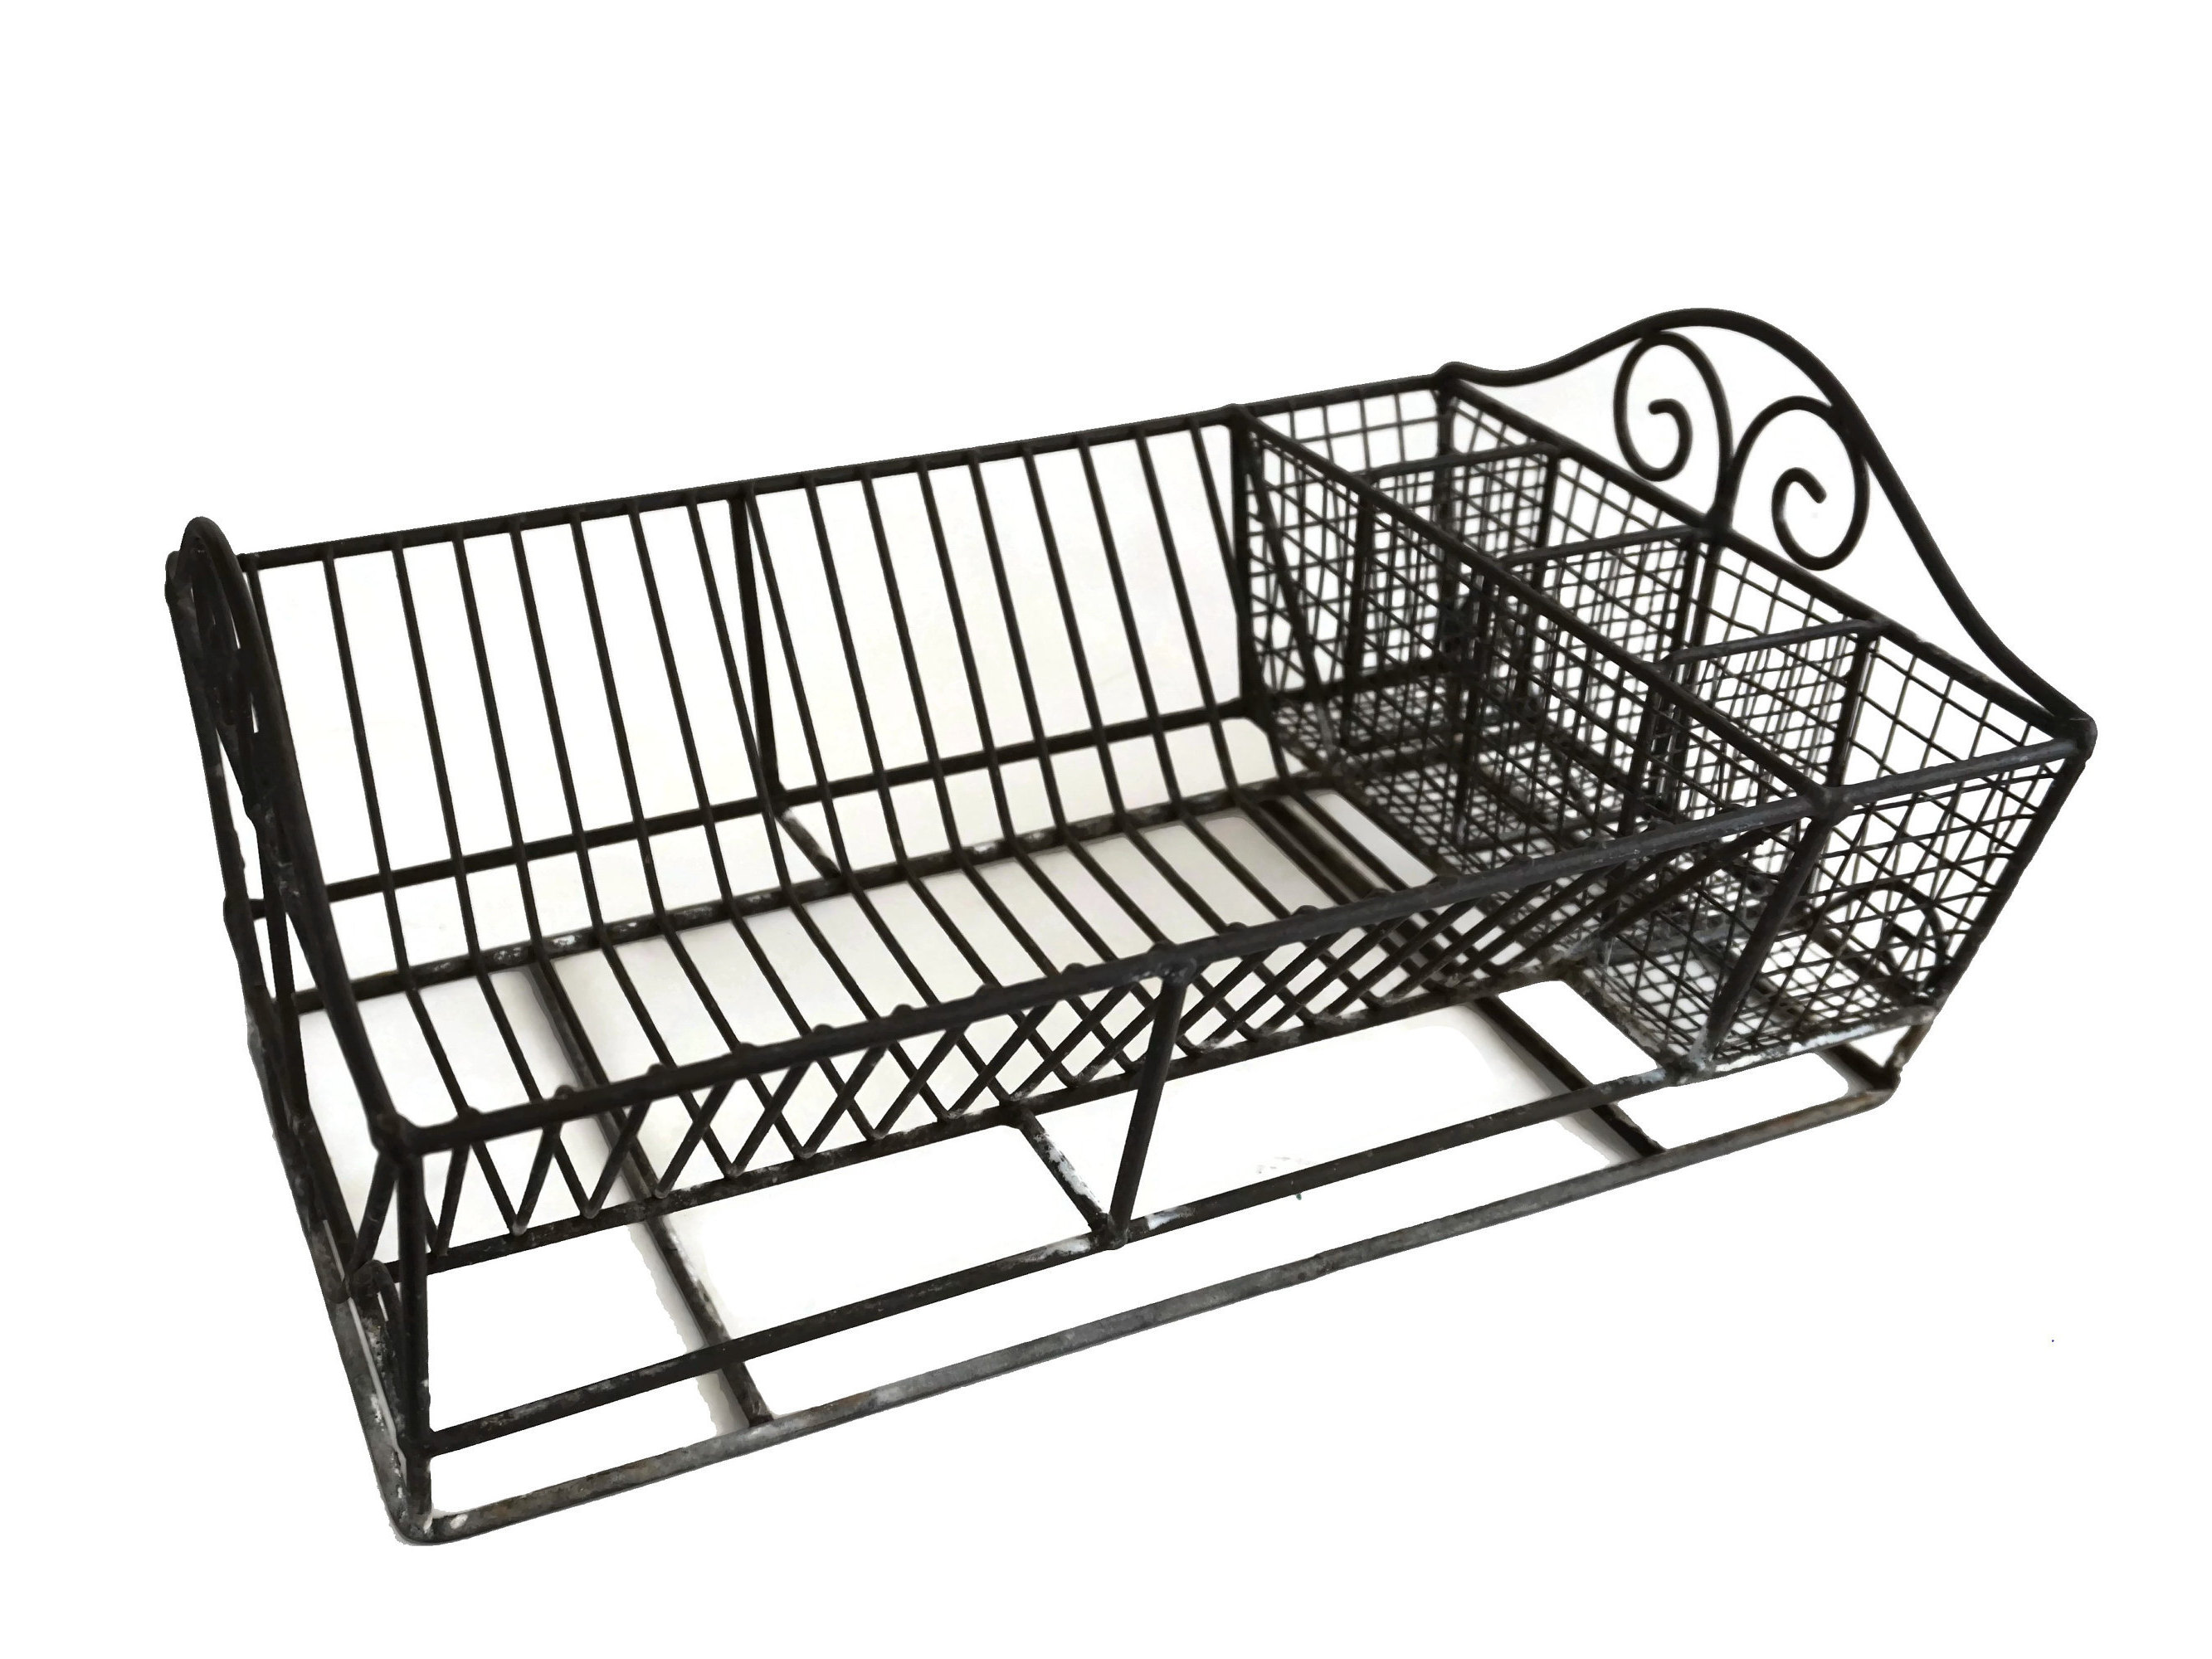 100 Old Wire Dish Rack ideas  dish racks, vintage dishes, dish drainers